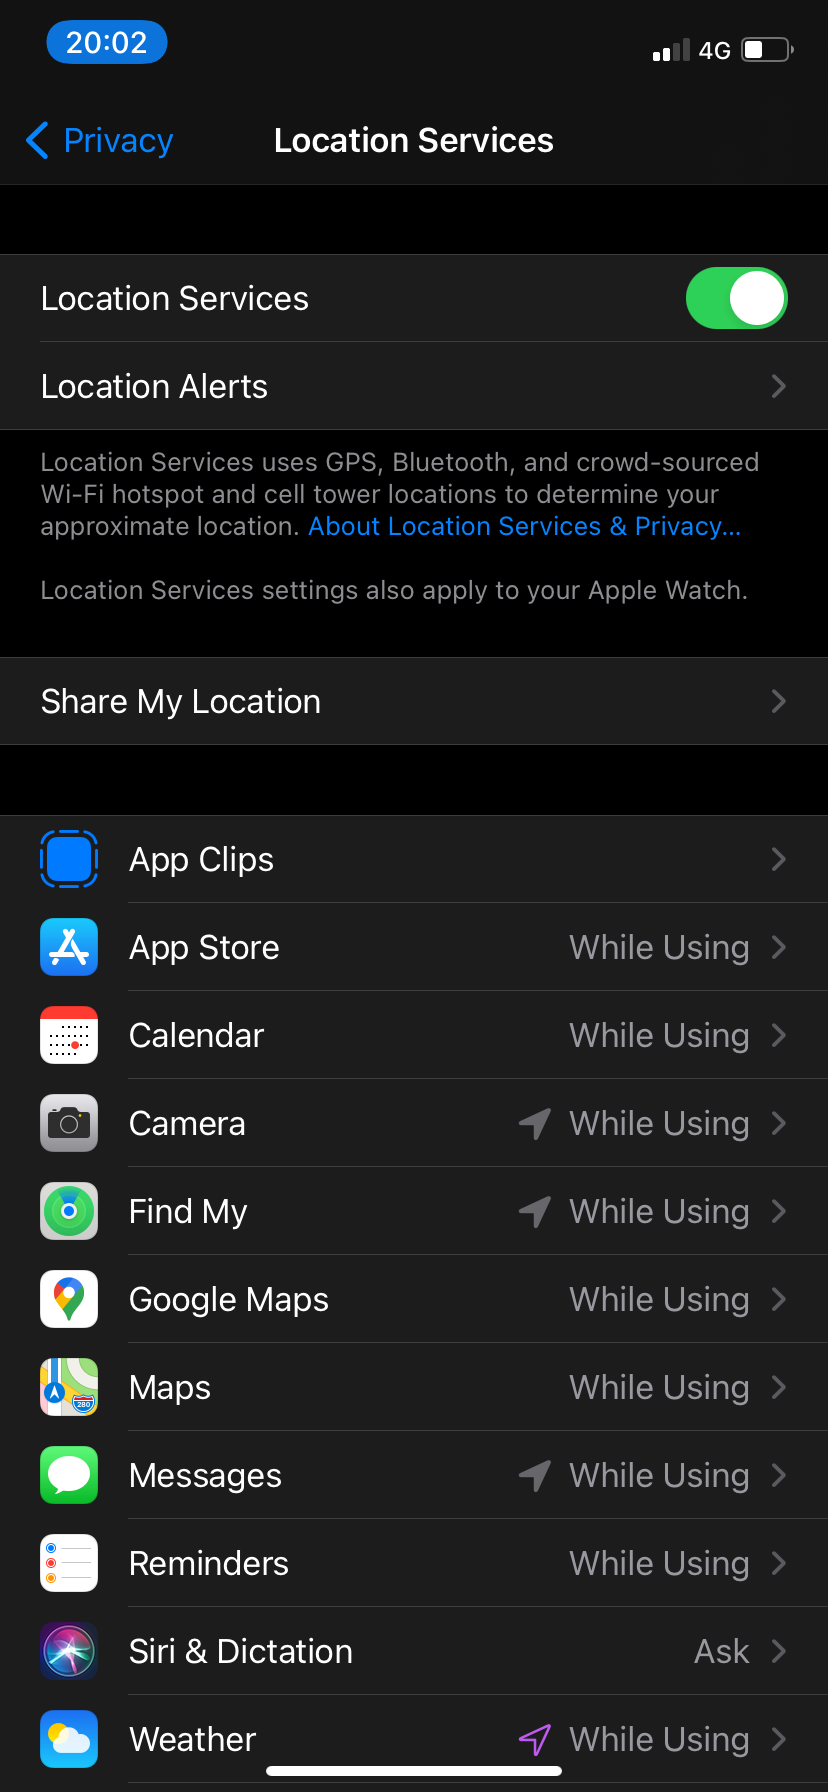 List of apps using Location Services.